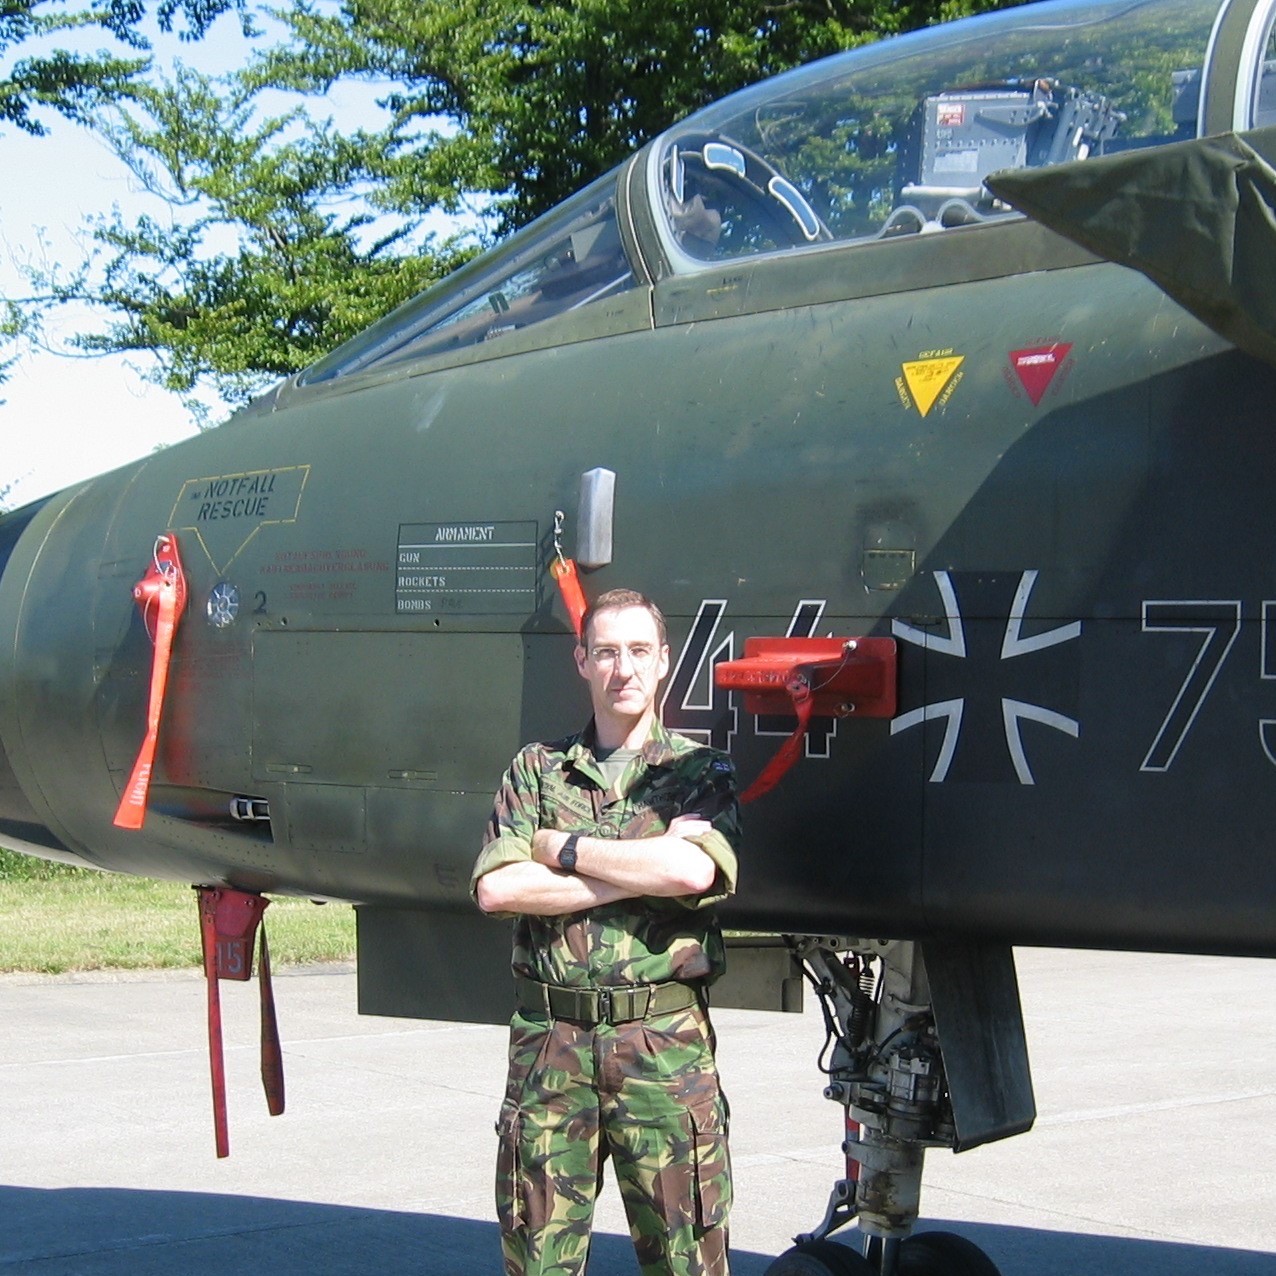 Archived image shows RAF Aviator standing cross armed next to a grounded aircraft.